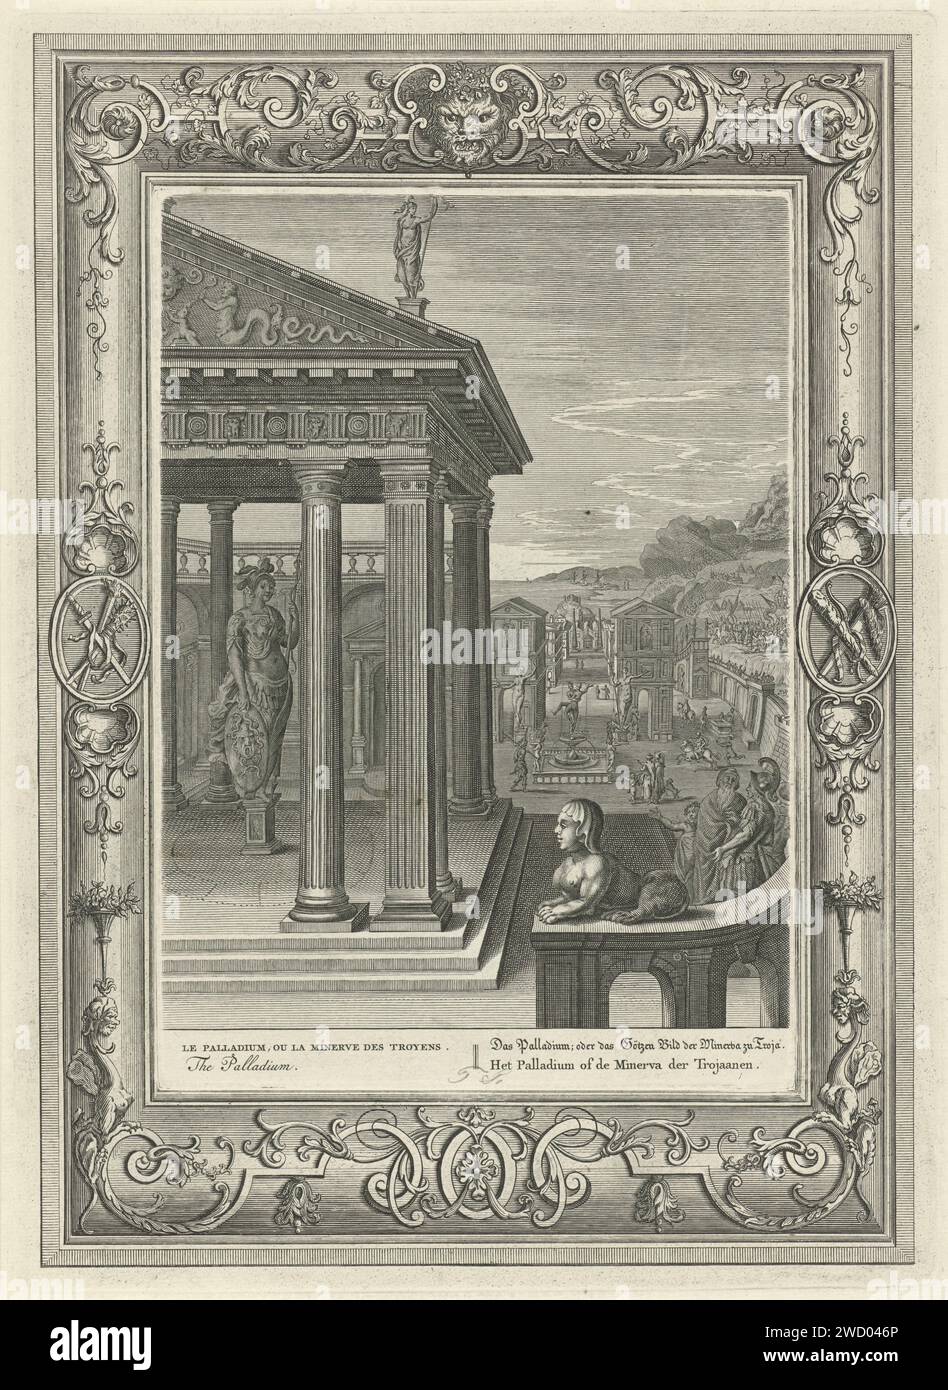 Tempel van Minerva te Troje, Bernard Picart (workshop of), after Bernard Picart, 1733 print In the foreground the temple with the Trojan cult image of Minerva (Palladium). In the background a face on the city. In the margin the title in French, English, German and Dutch. The performance is decorated with an ornamental edge. Amsterdam paper etching / engraving the Temple (in general)  Jewish religion. (story of) Minerva (Pallas, Athena). scrollwork, strapwork  ornament Stock Photo